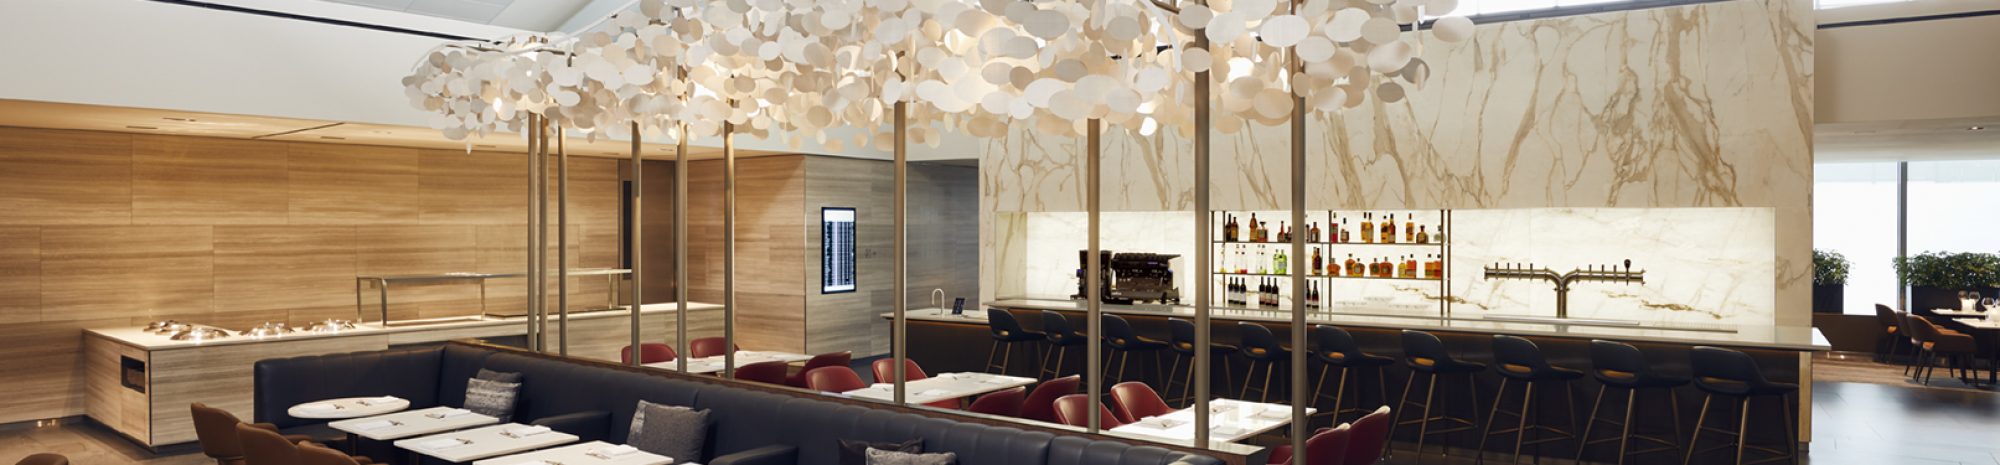 Access an upscale experience at Air Canada’s Maple Leaf lounges